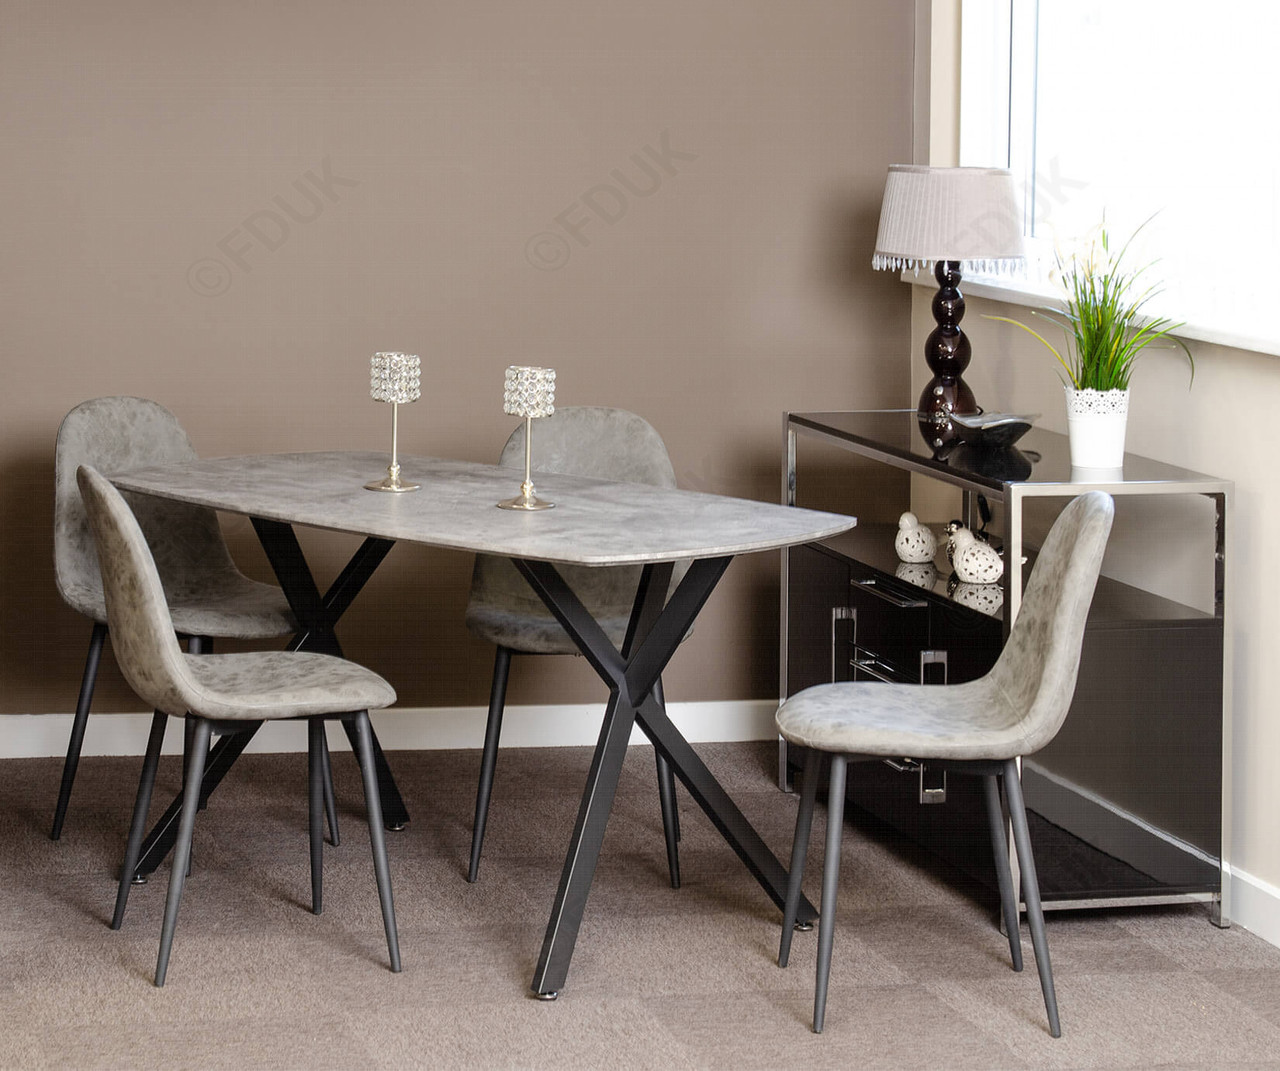 Athens Round Coffee Table Set Concrete Effect And Black / Round Coffee